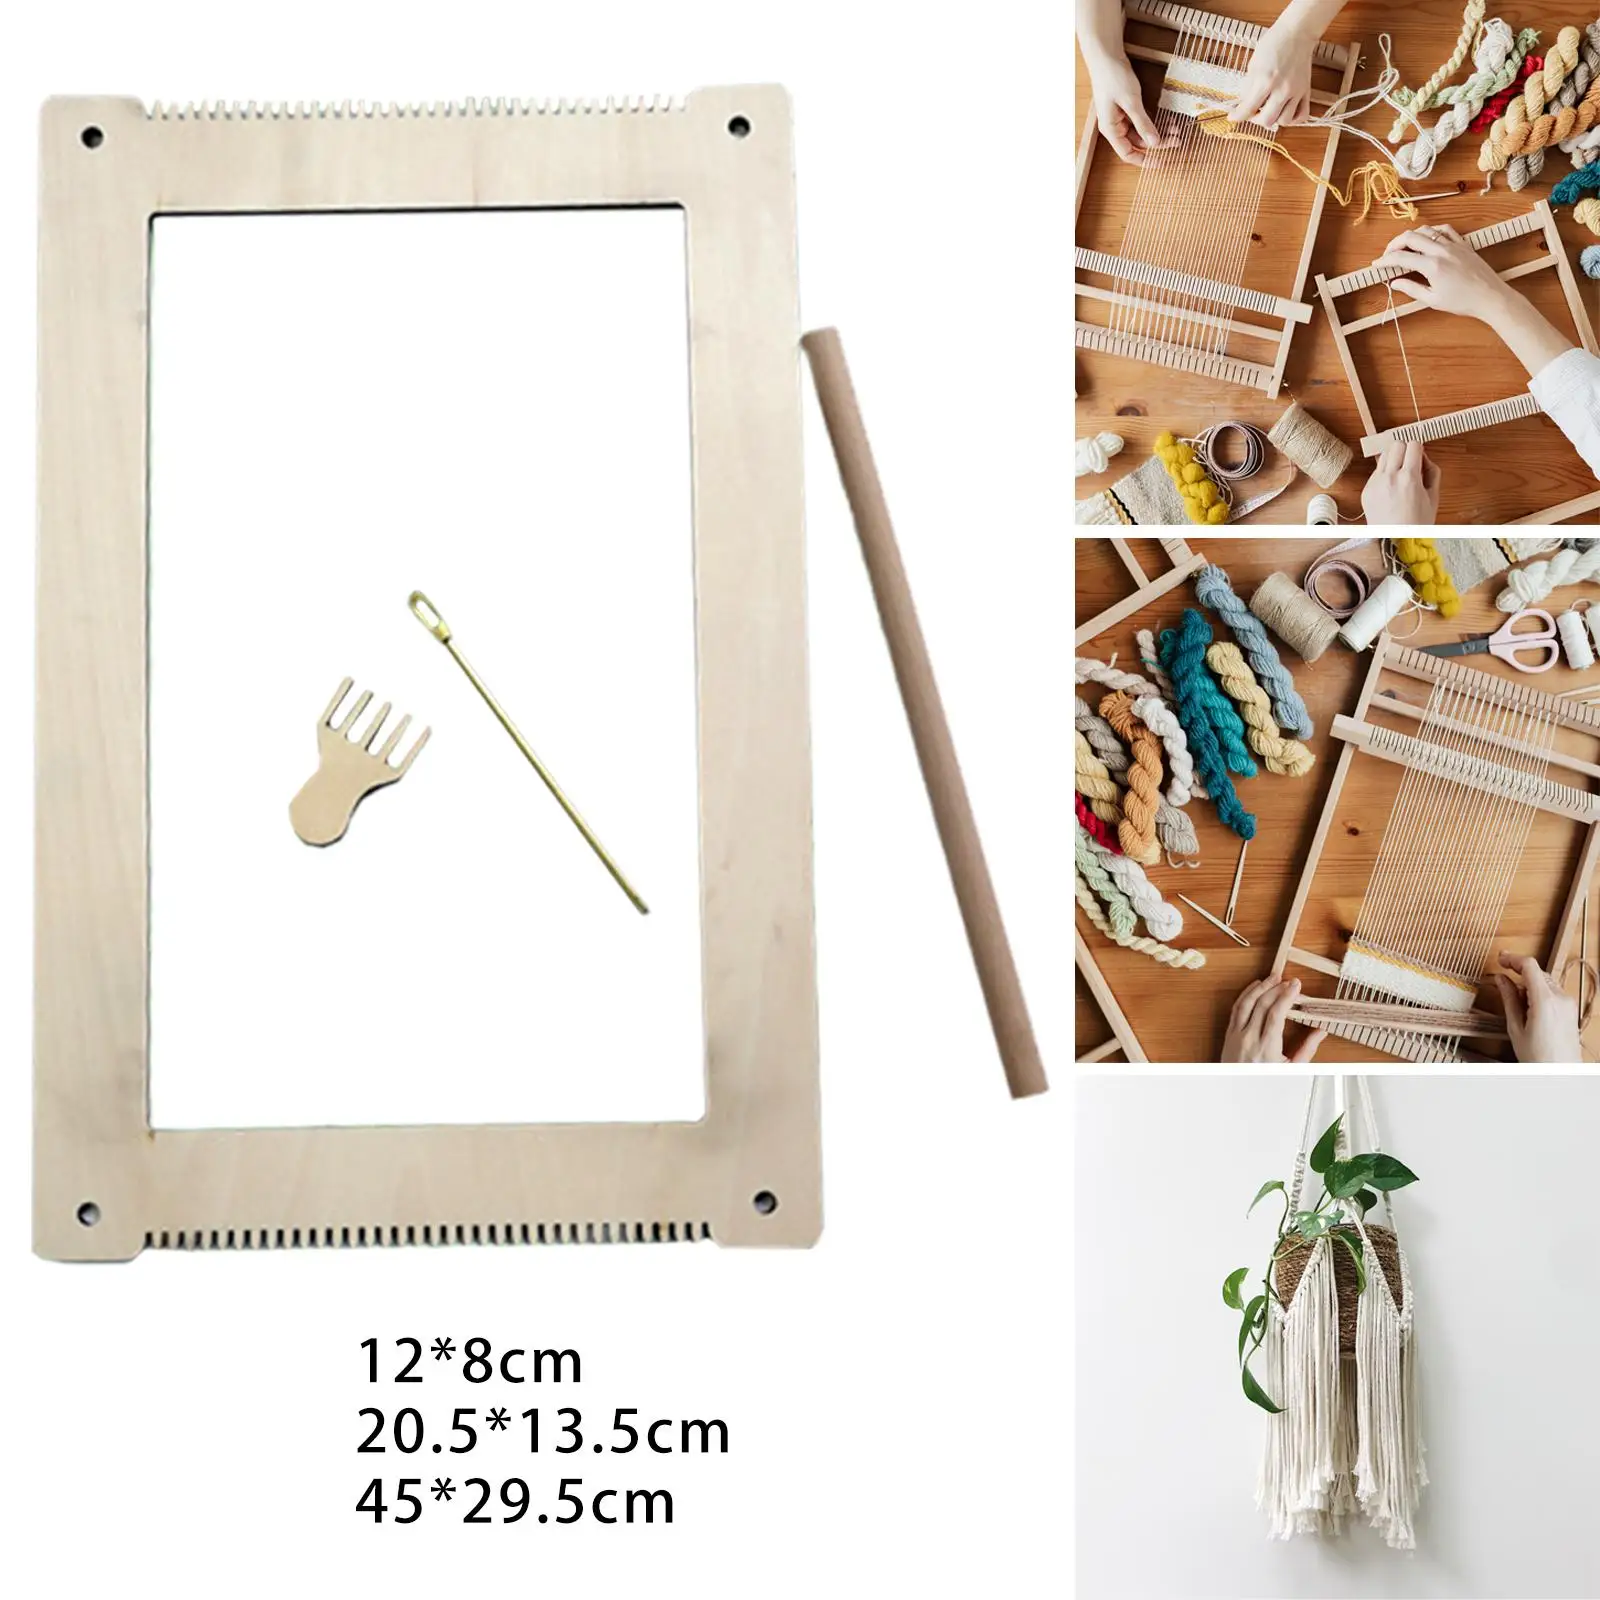 Multi Craft Wooden Weaving Looms Kit Hand Knitted Machine Handmade Knitting Loom Lap Frame for Kids Adults Rug Blanket Tapestry